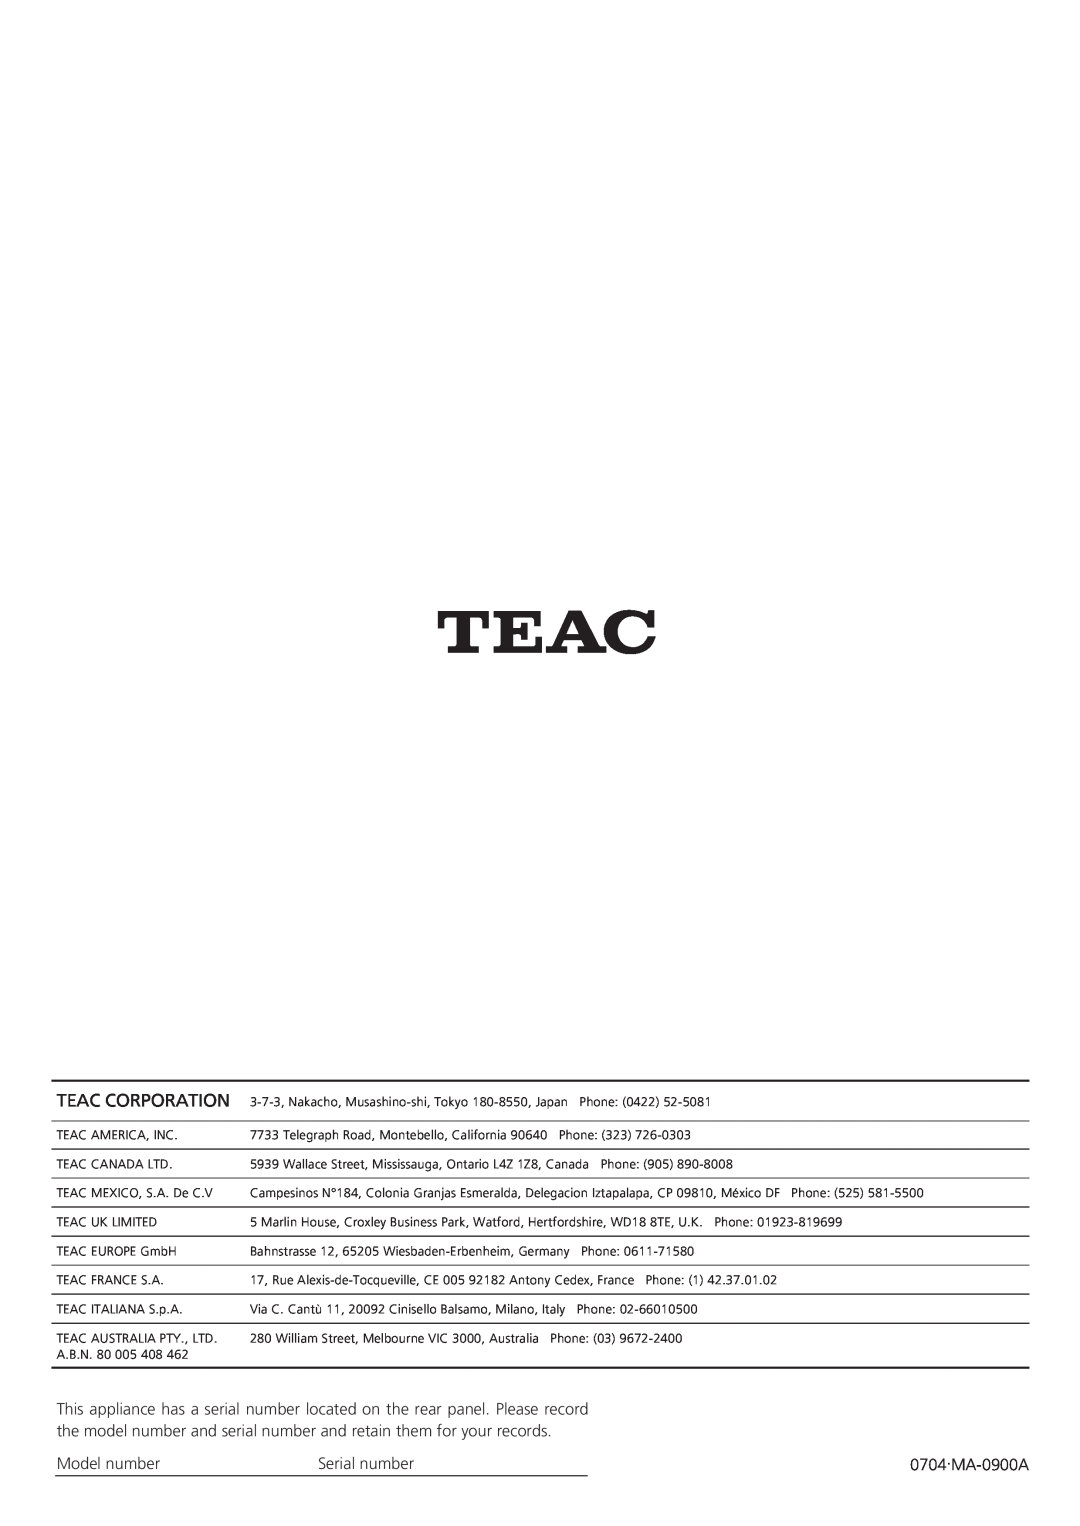 Teac AG-15D owner manual Teac Corporation, Model number, Serial number, 0704.MA-0900A 